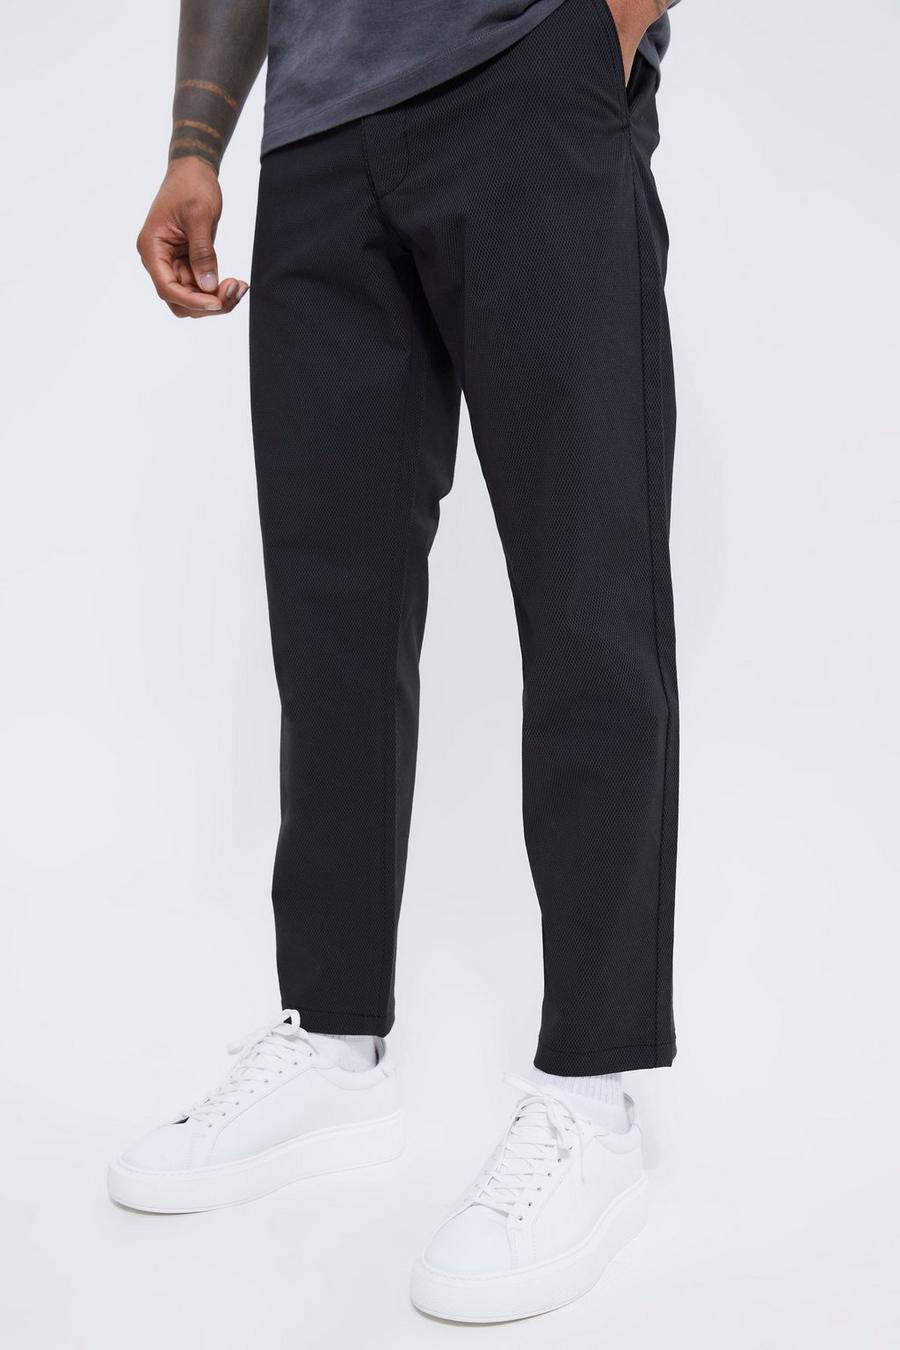 Black Fixed Waist Slim Fit Cropped Chino Pants